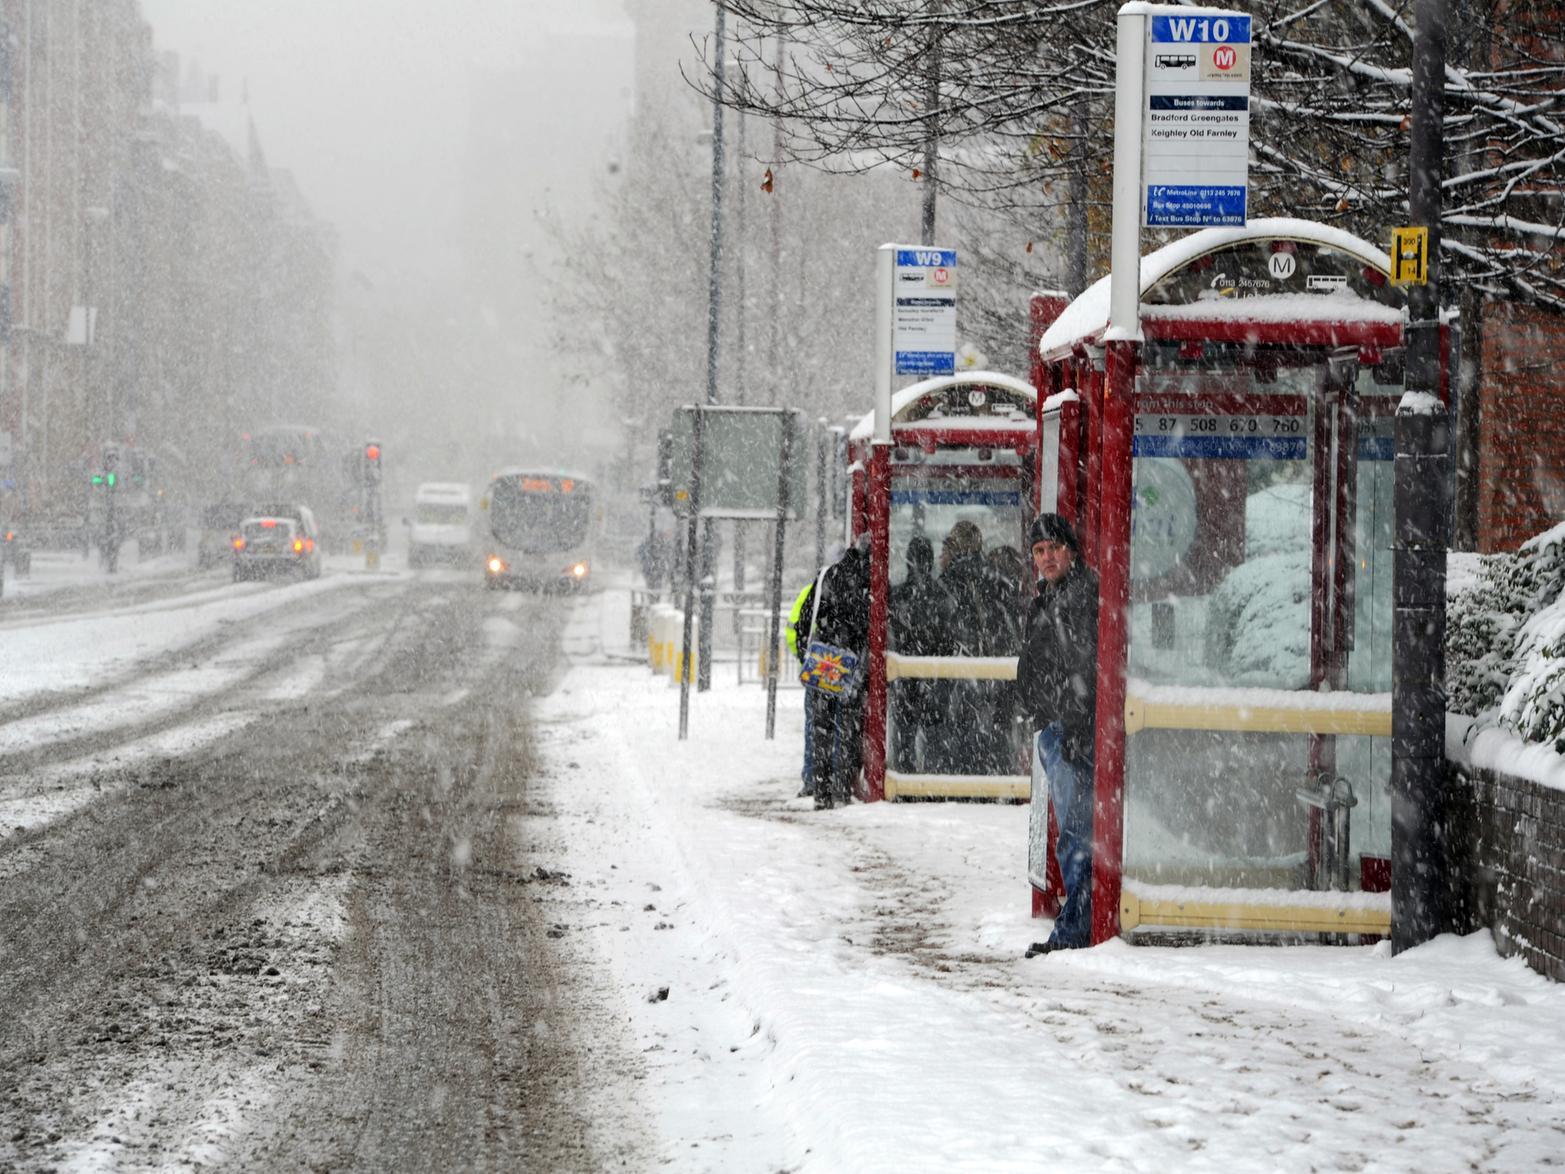 The snow brought widespread disruption to the city's public transport network.